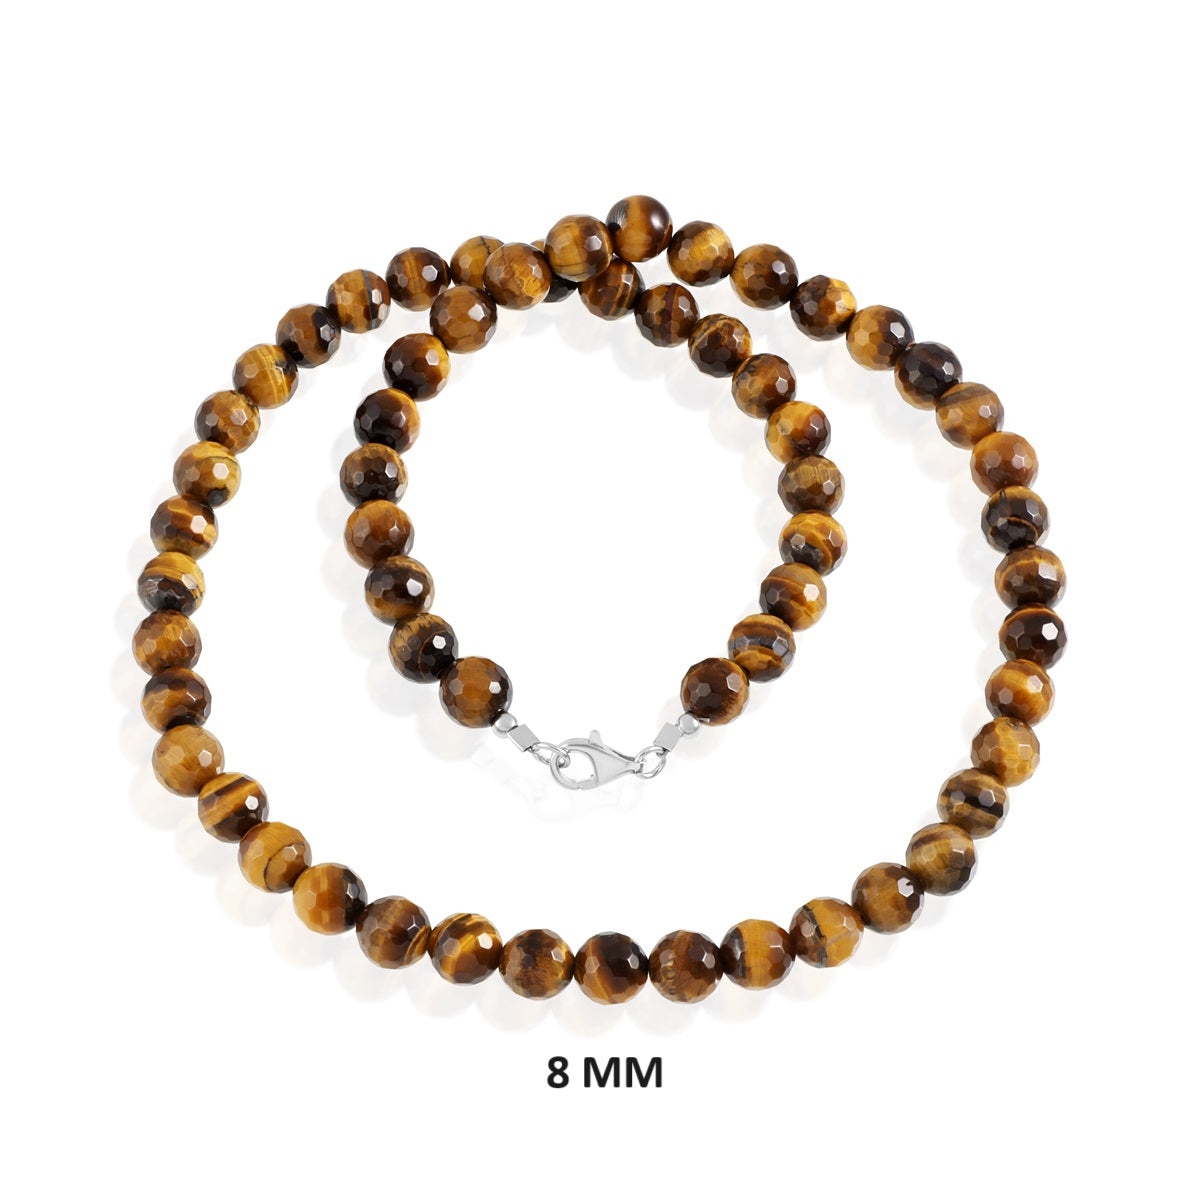 Tiger's Eye Beads Silver Necklace: Confidence and Strength